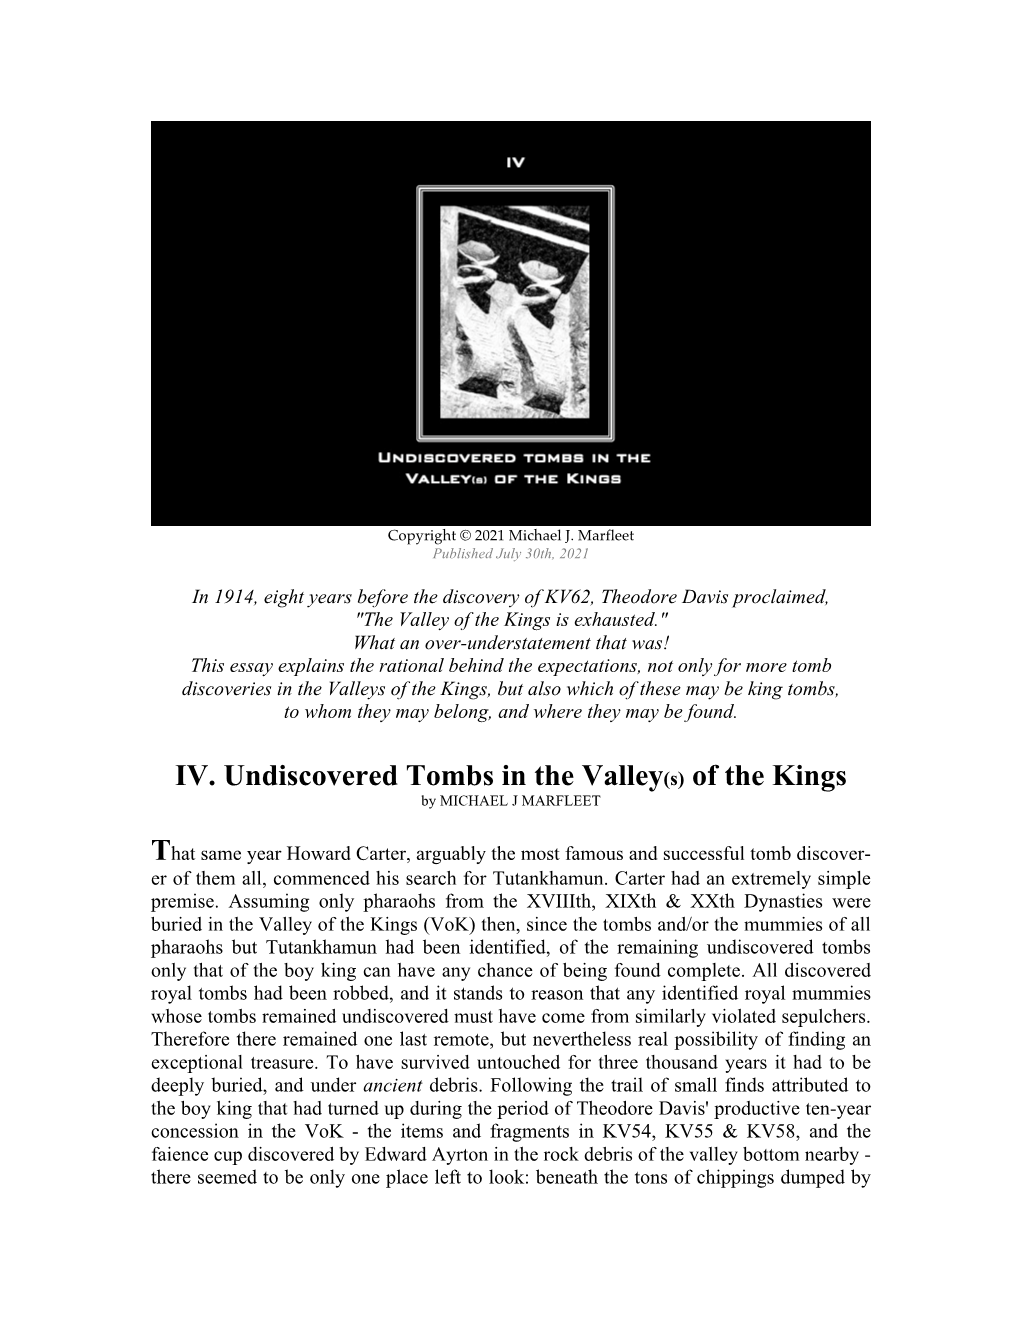 IV. Undiscovered Tombs in the Valley(S) of the Kings by MICHAEL J MARFLEET